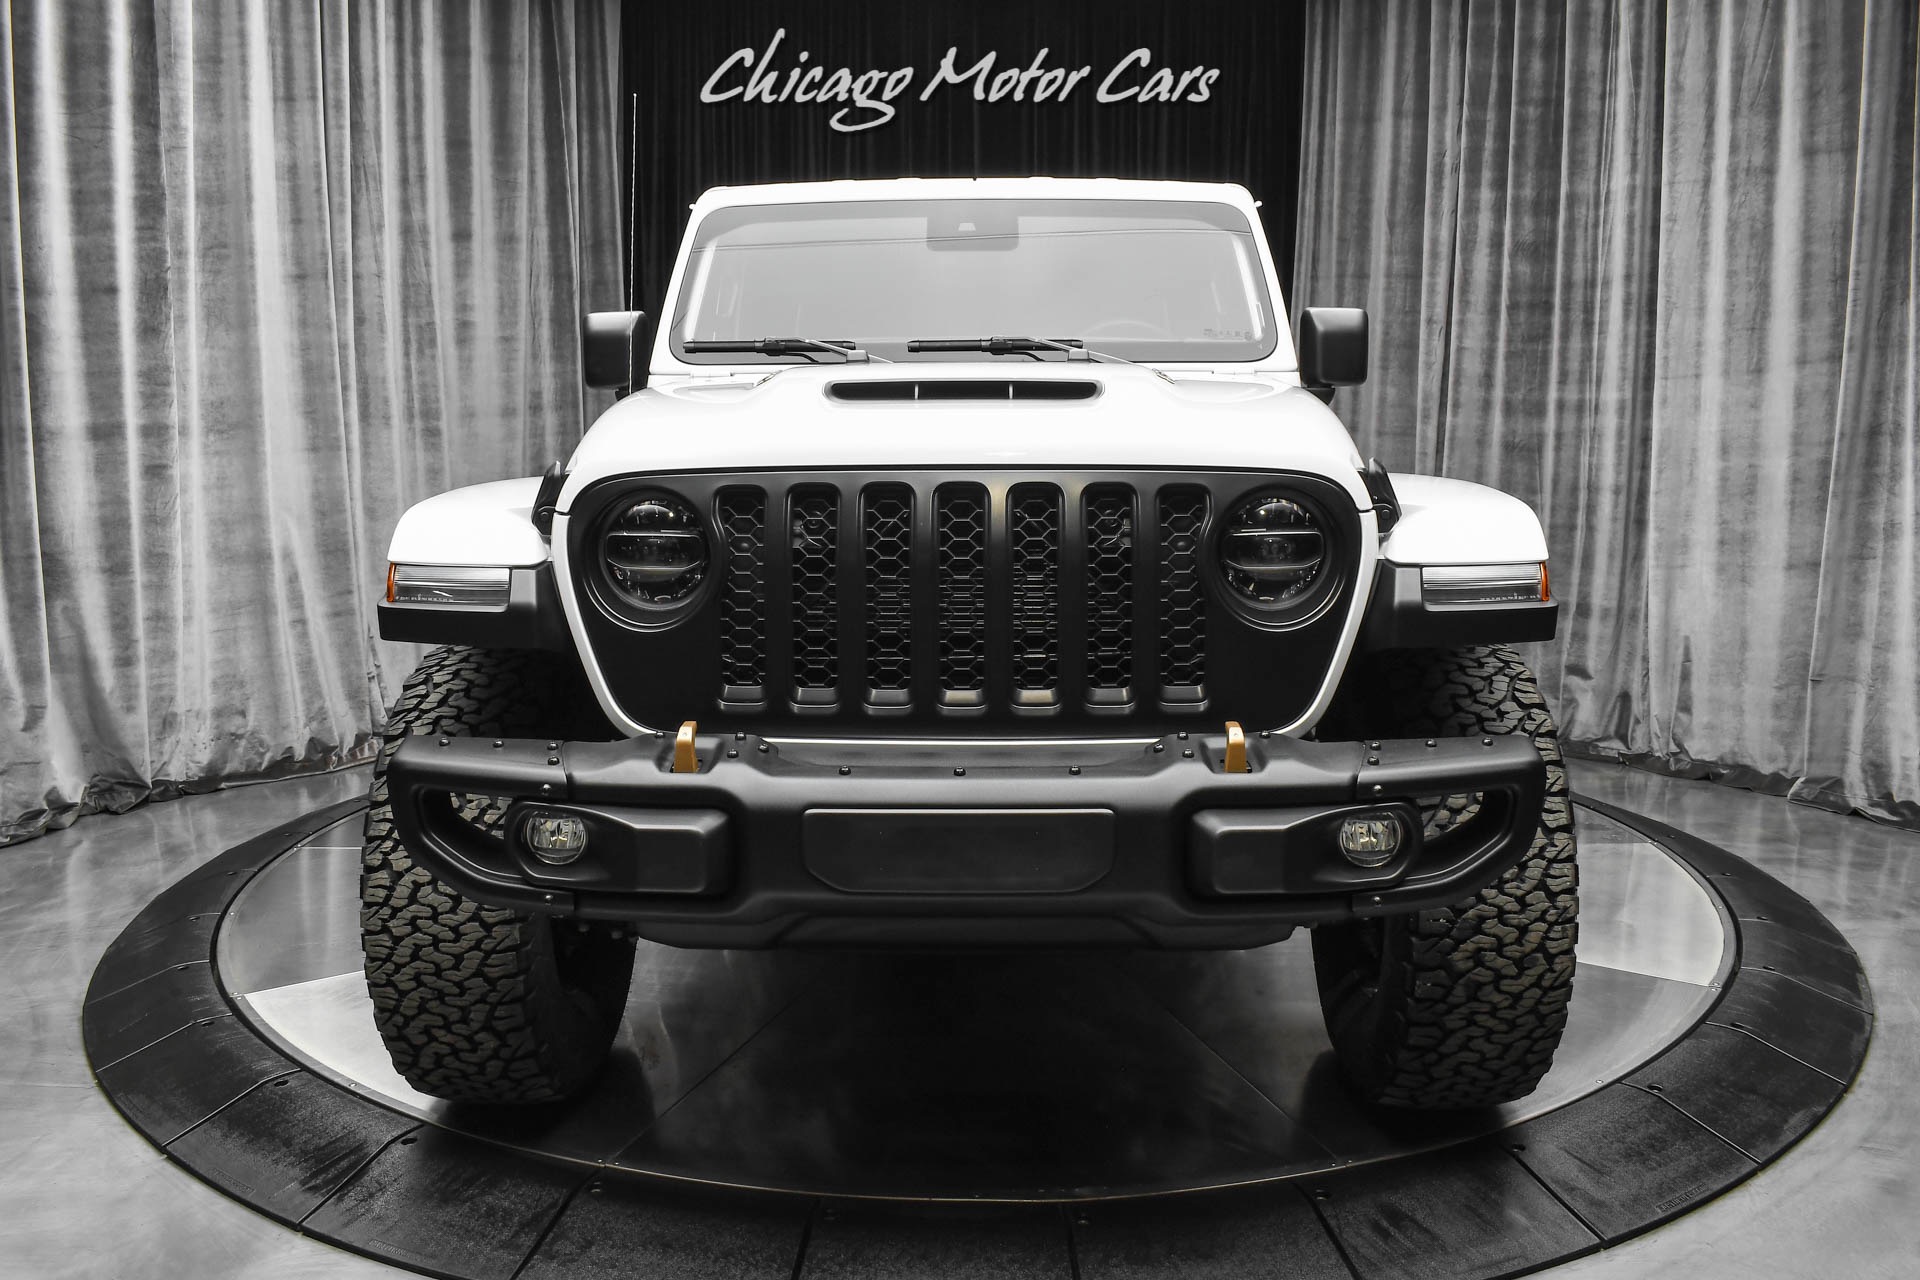 Used-2021-Jeep-Wrangler-Unlimited-Rubicon-392-Newly-Released-Xtreme-Recon-Package-64L-HEMI-35-Beadlock-Wheel